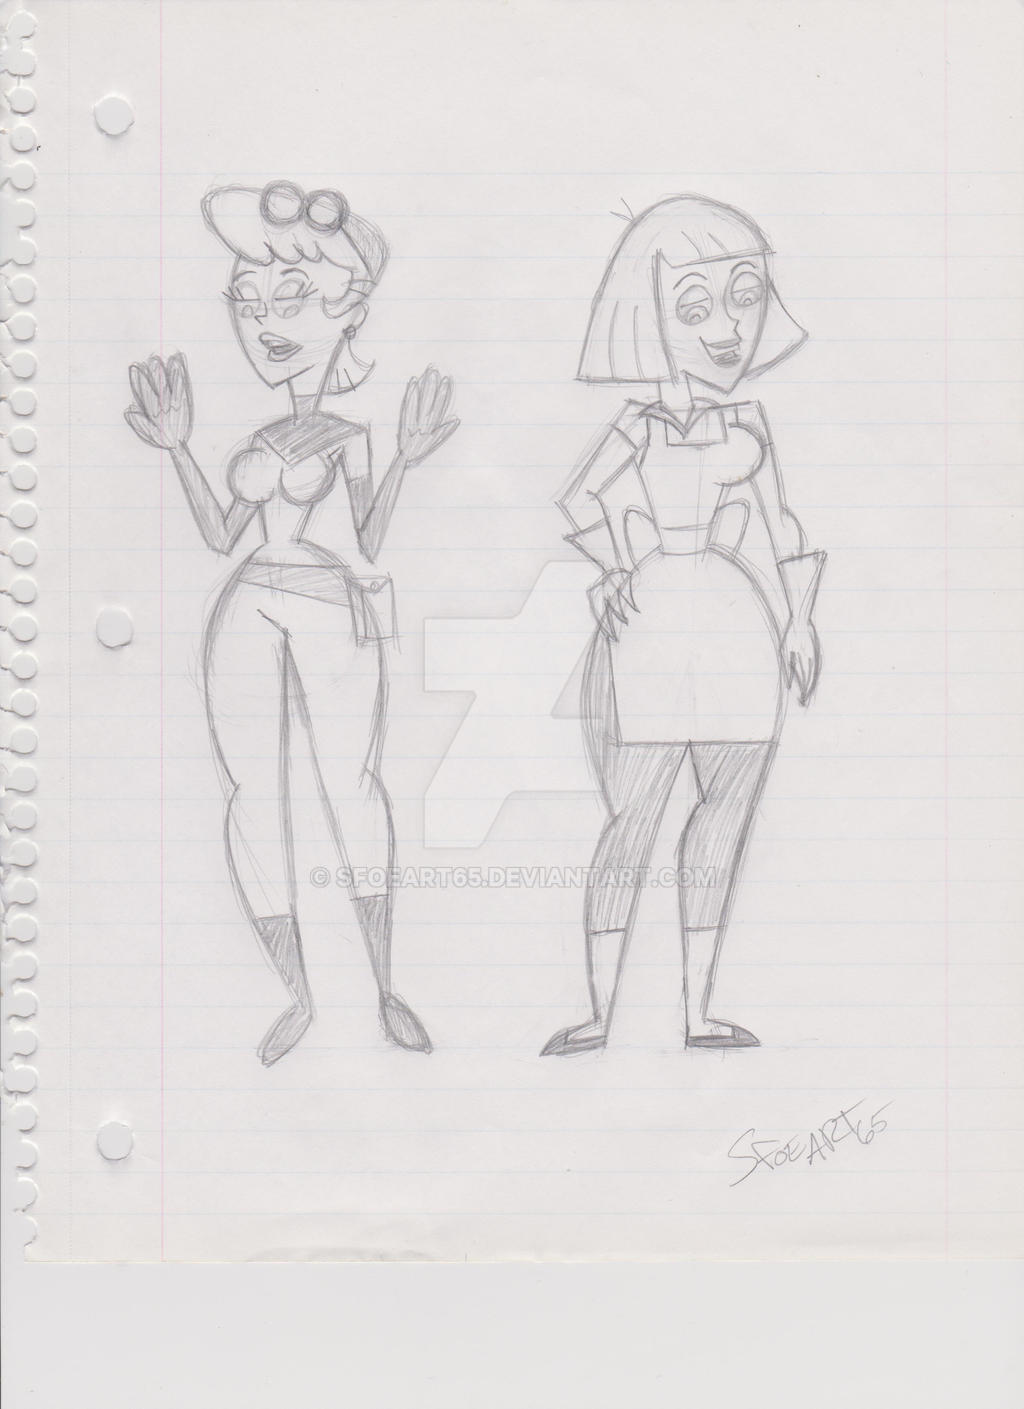 Dexter's mom and Maddie Fenton clothes swap by sfoeart65 on DeviantArt